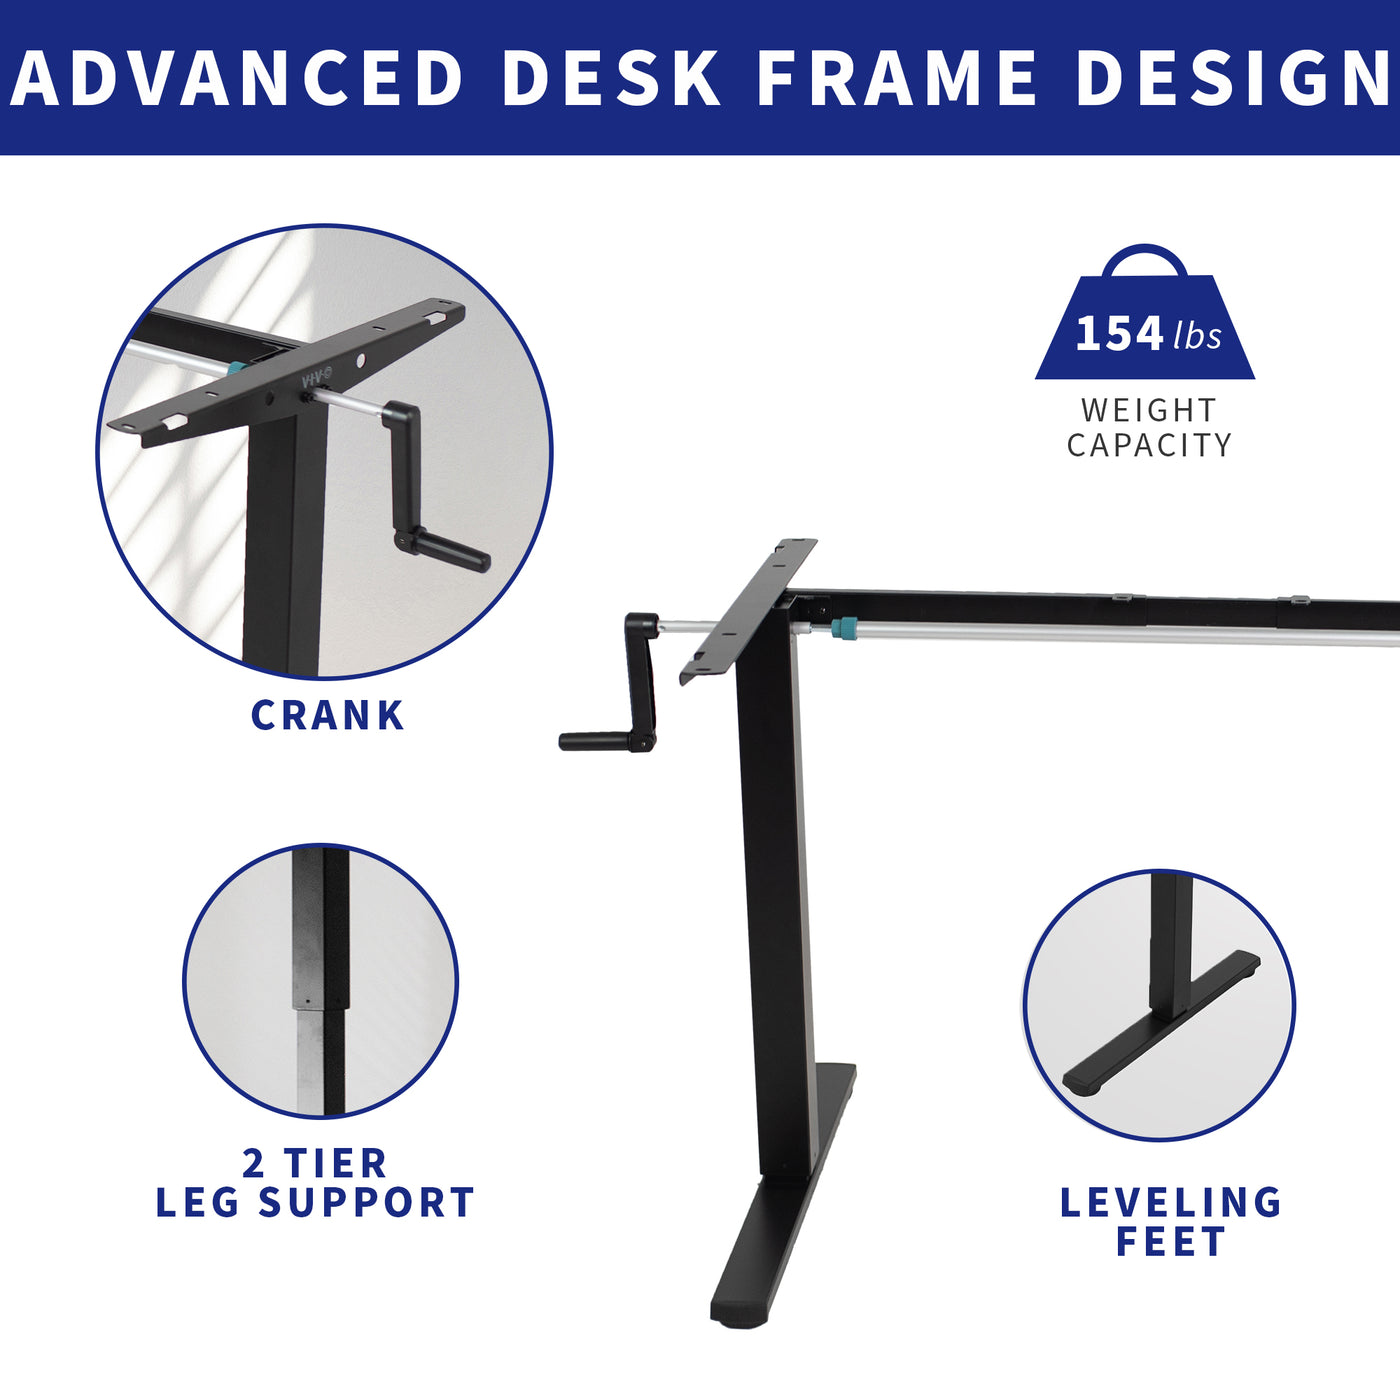 Advanced desk frame structure with leveling feet, two-tier leg support, and side desk manual crank for smooth height adjustments.